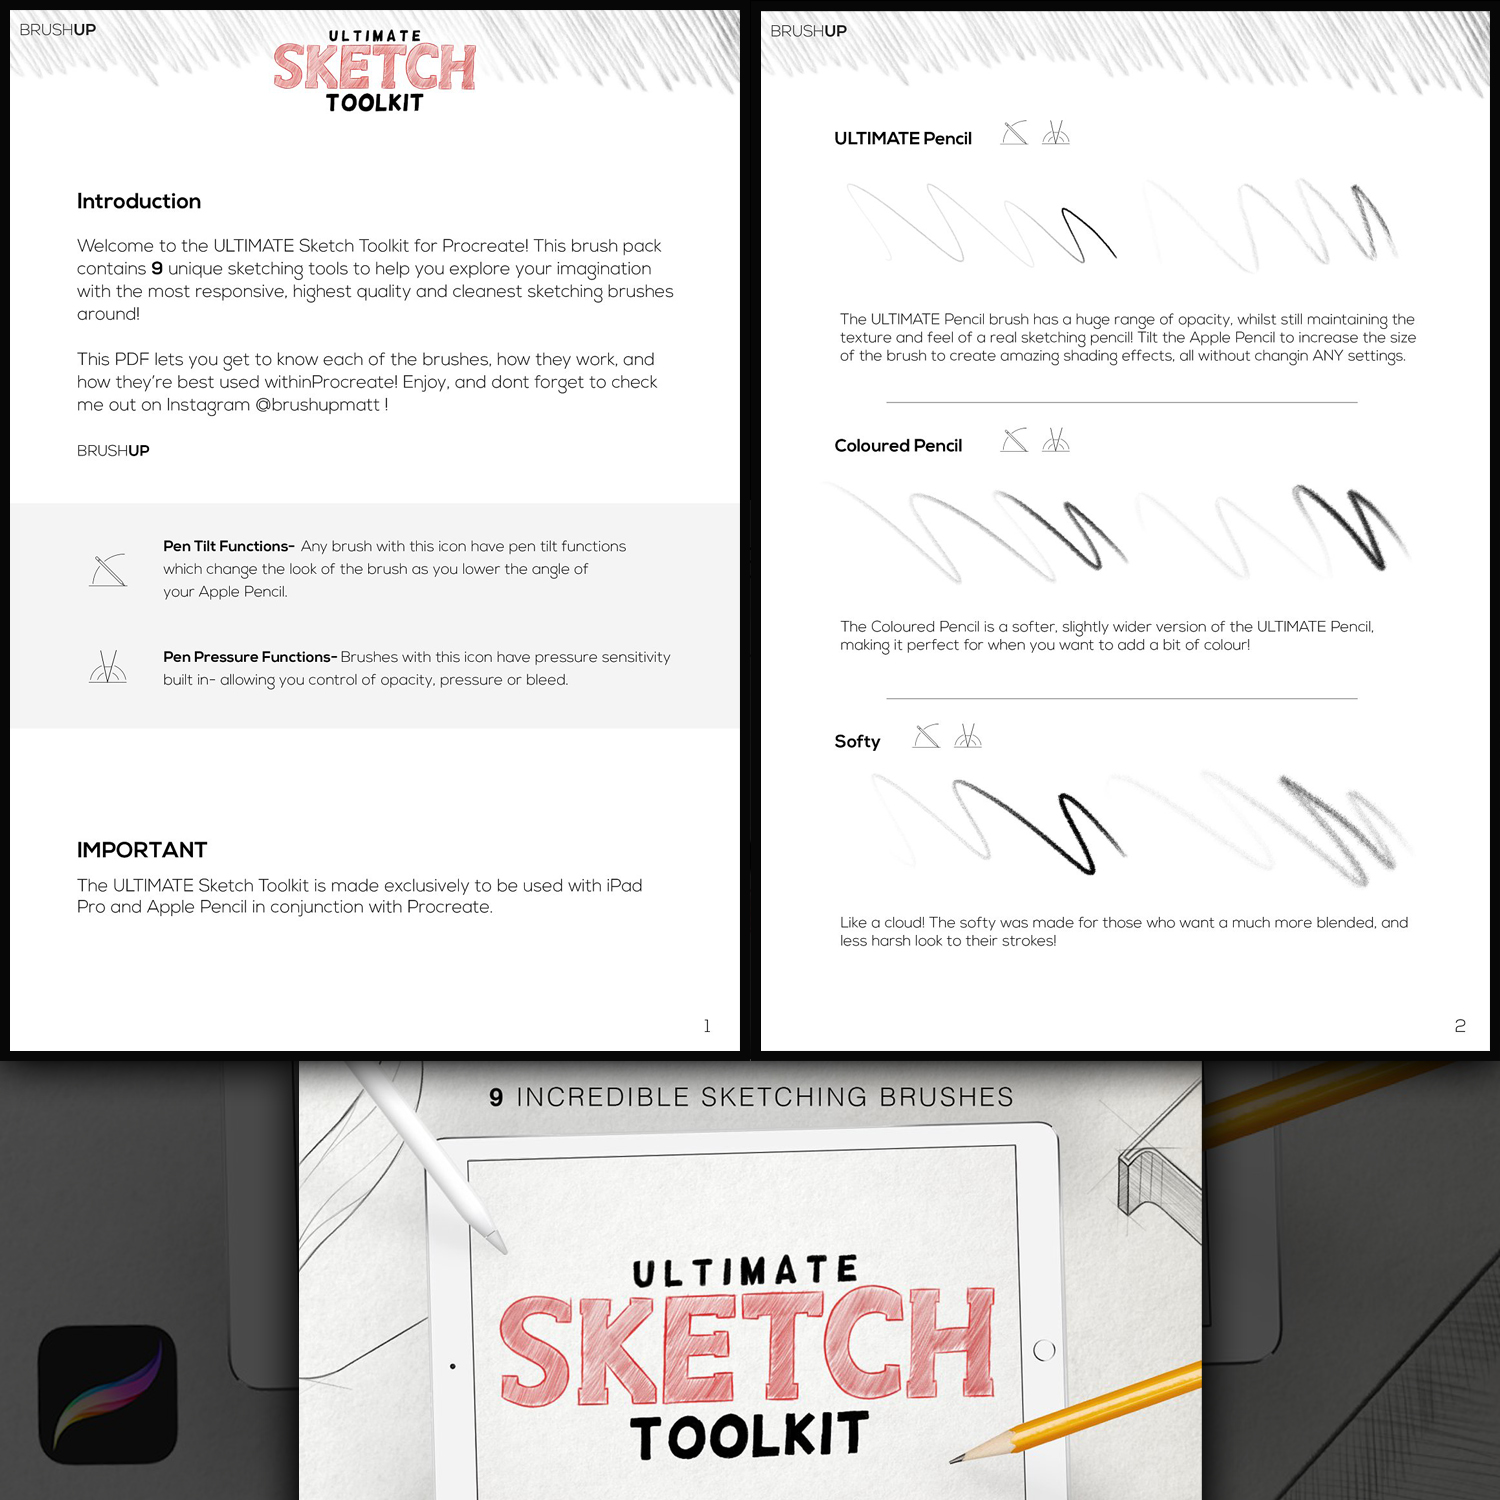 ULTIMATE Sketch Toolkit cover.